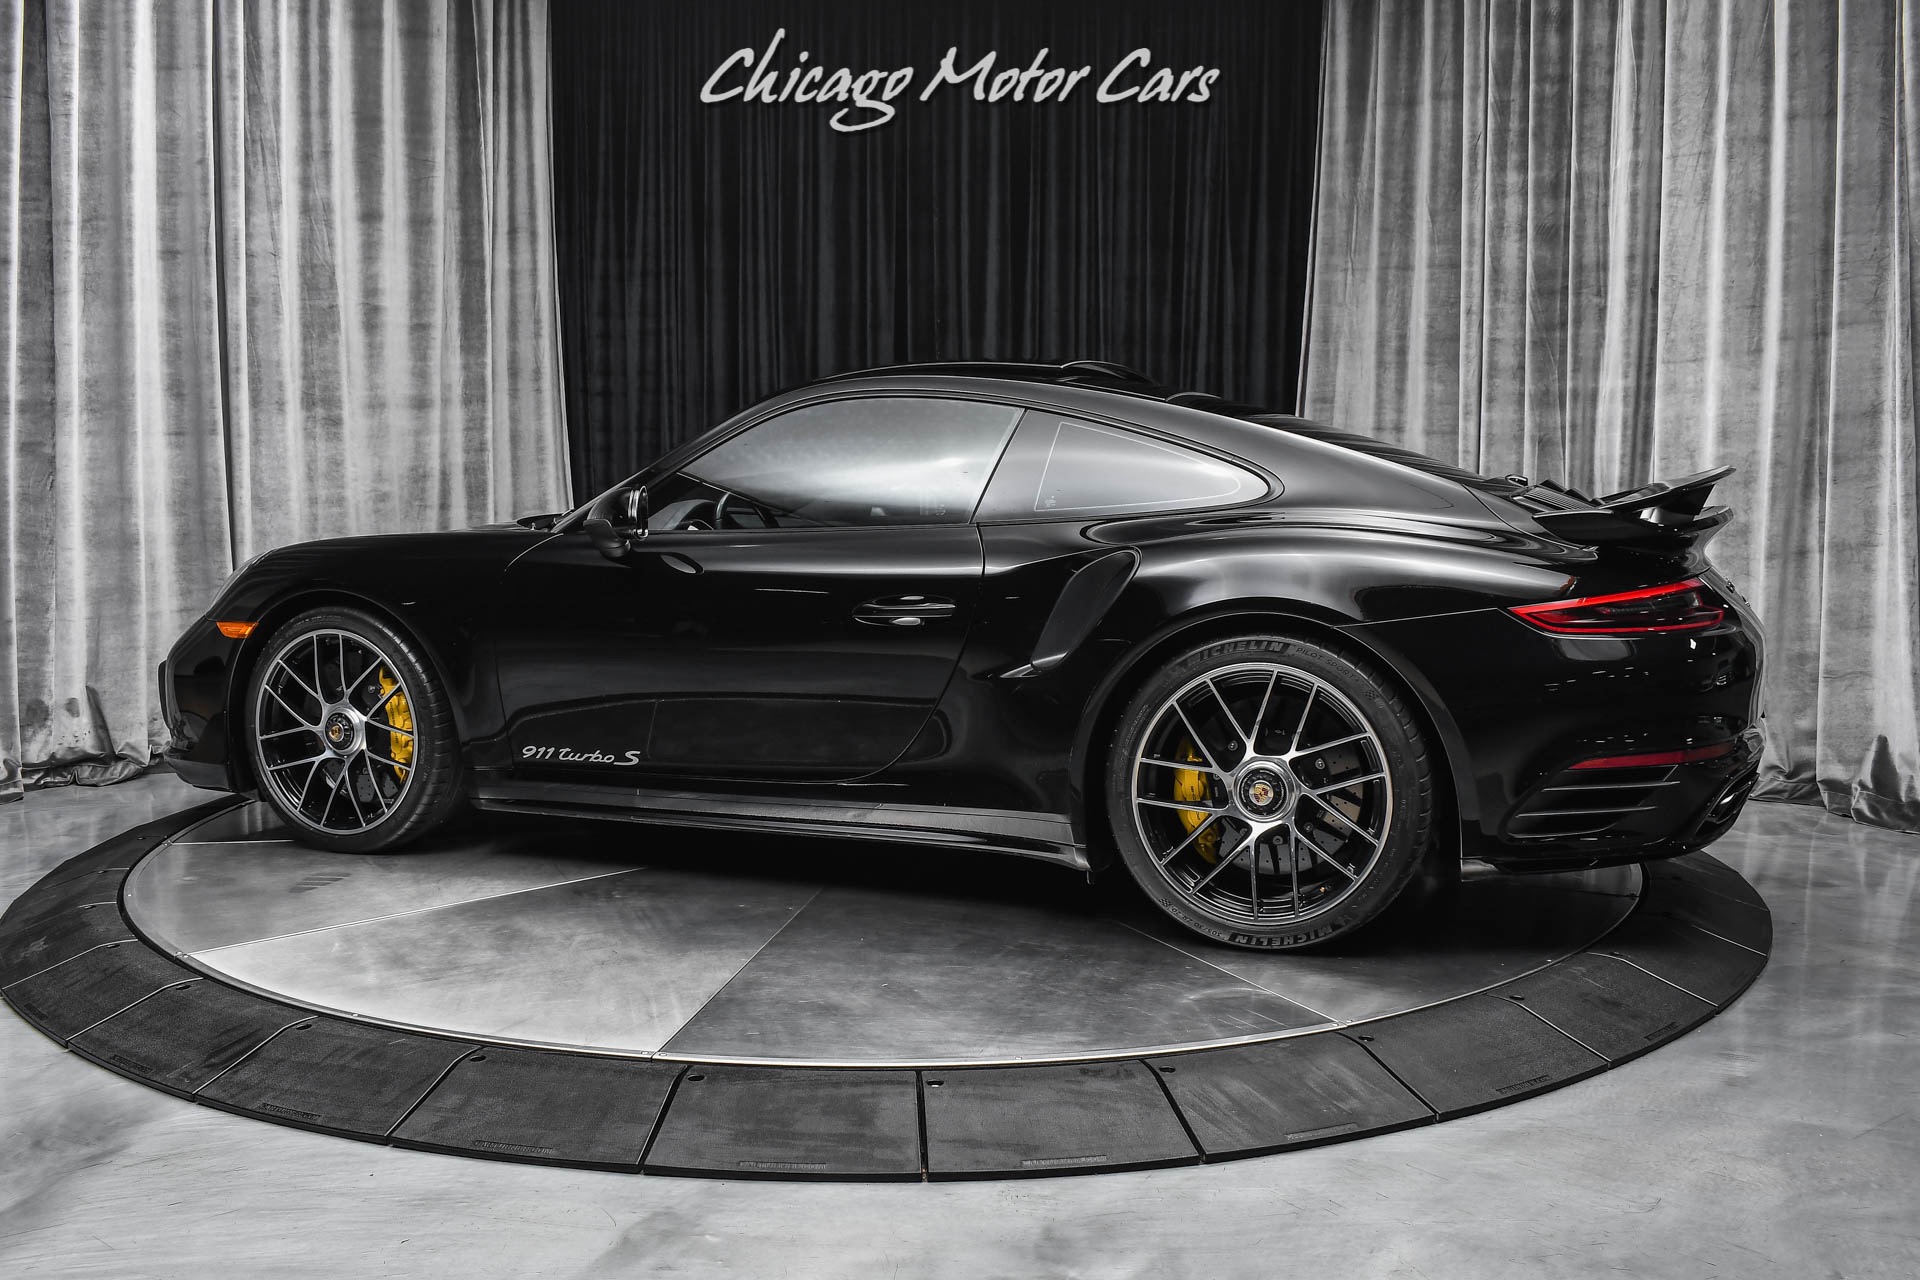 Used 19 Porsche 911 Turbo S Coupe Original Msrp 248k Loaded Hot Color Combo Turbo Aero Kit For Sale Special Pricing Chicago Motor Cars Stock 177